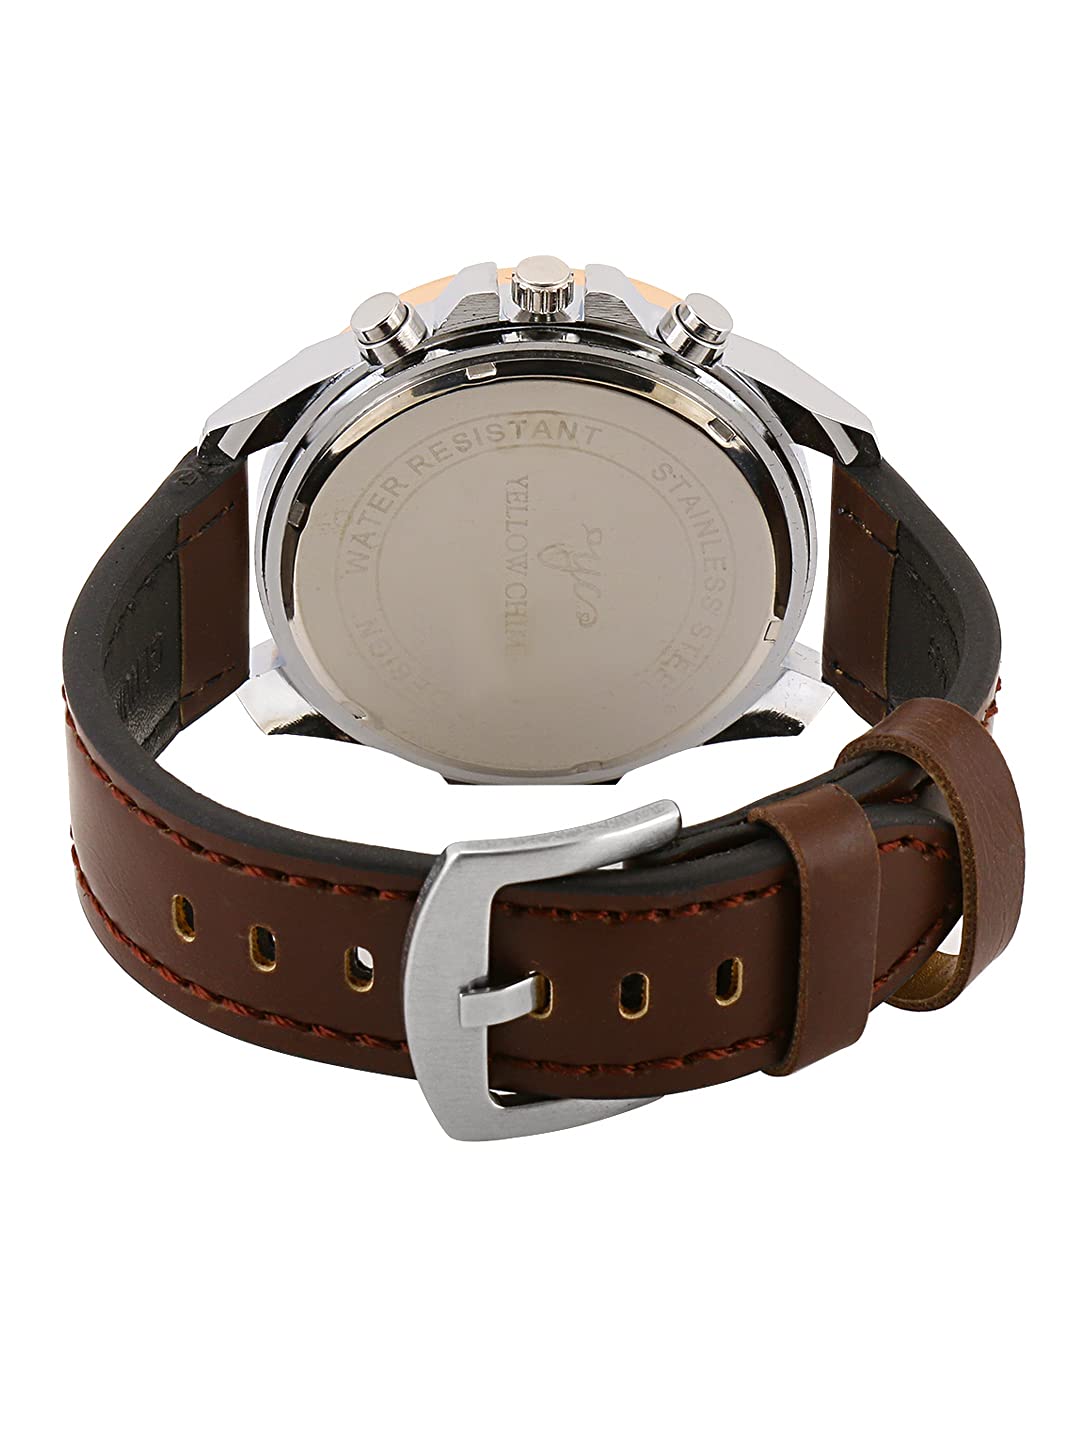 Yellow Chimes Stainless Steel Genuin Leather Brown Analogue Watch with Brown Leather Bracelet for Men & Boys in a Gift Box, Medium (YCMG-01WTCHBRT-BR)